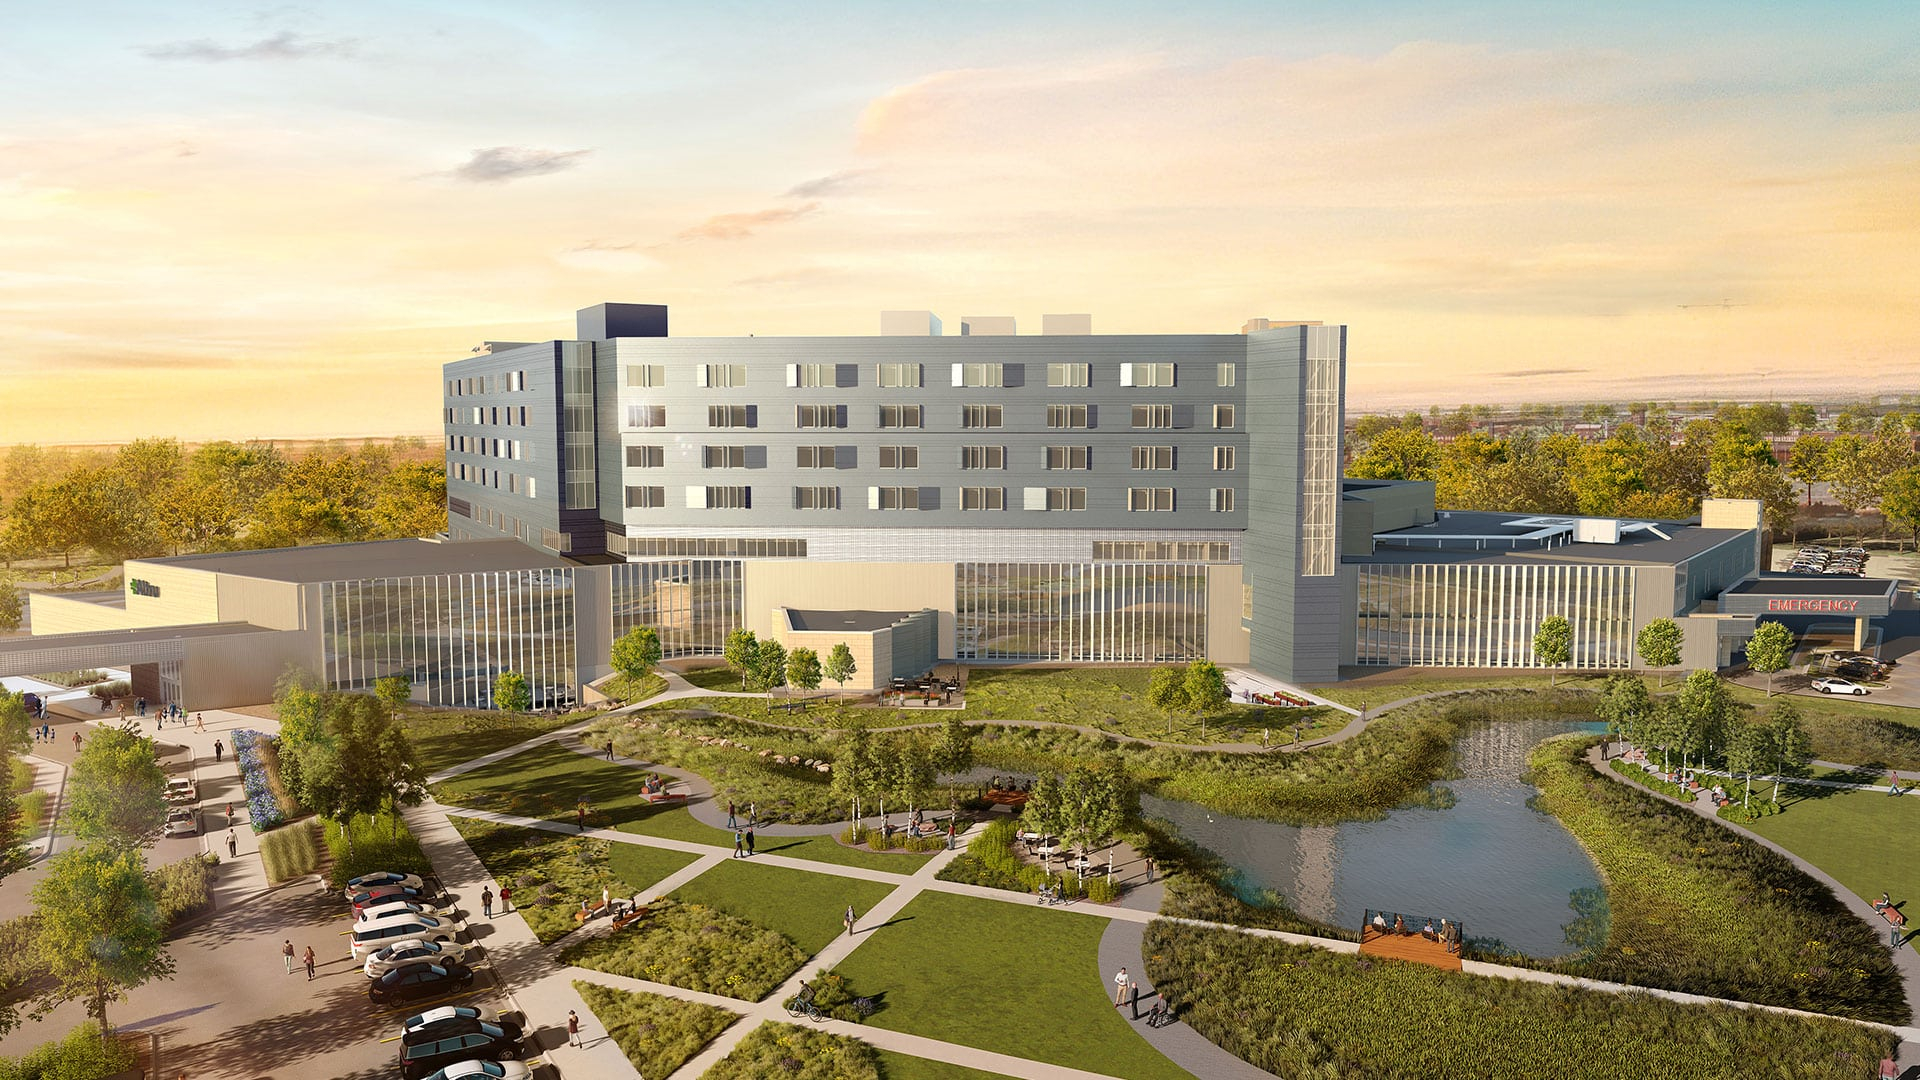 Construction Of New 475M Altru Hospital On Track For 2024 Completion